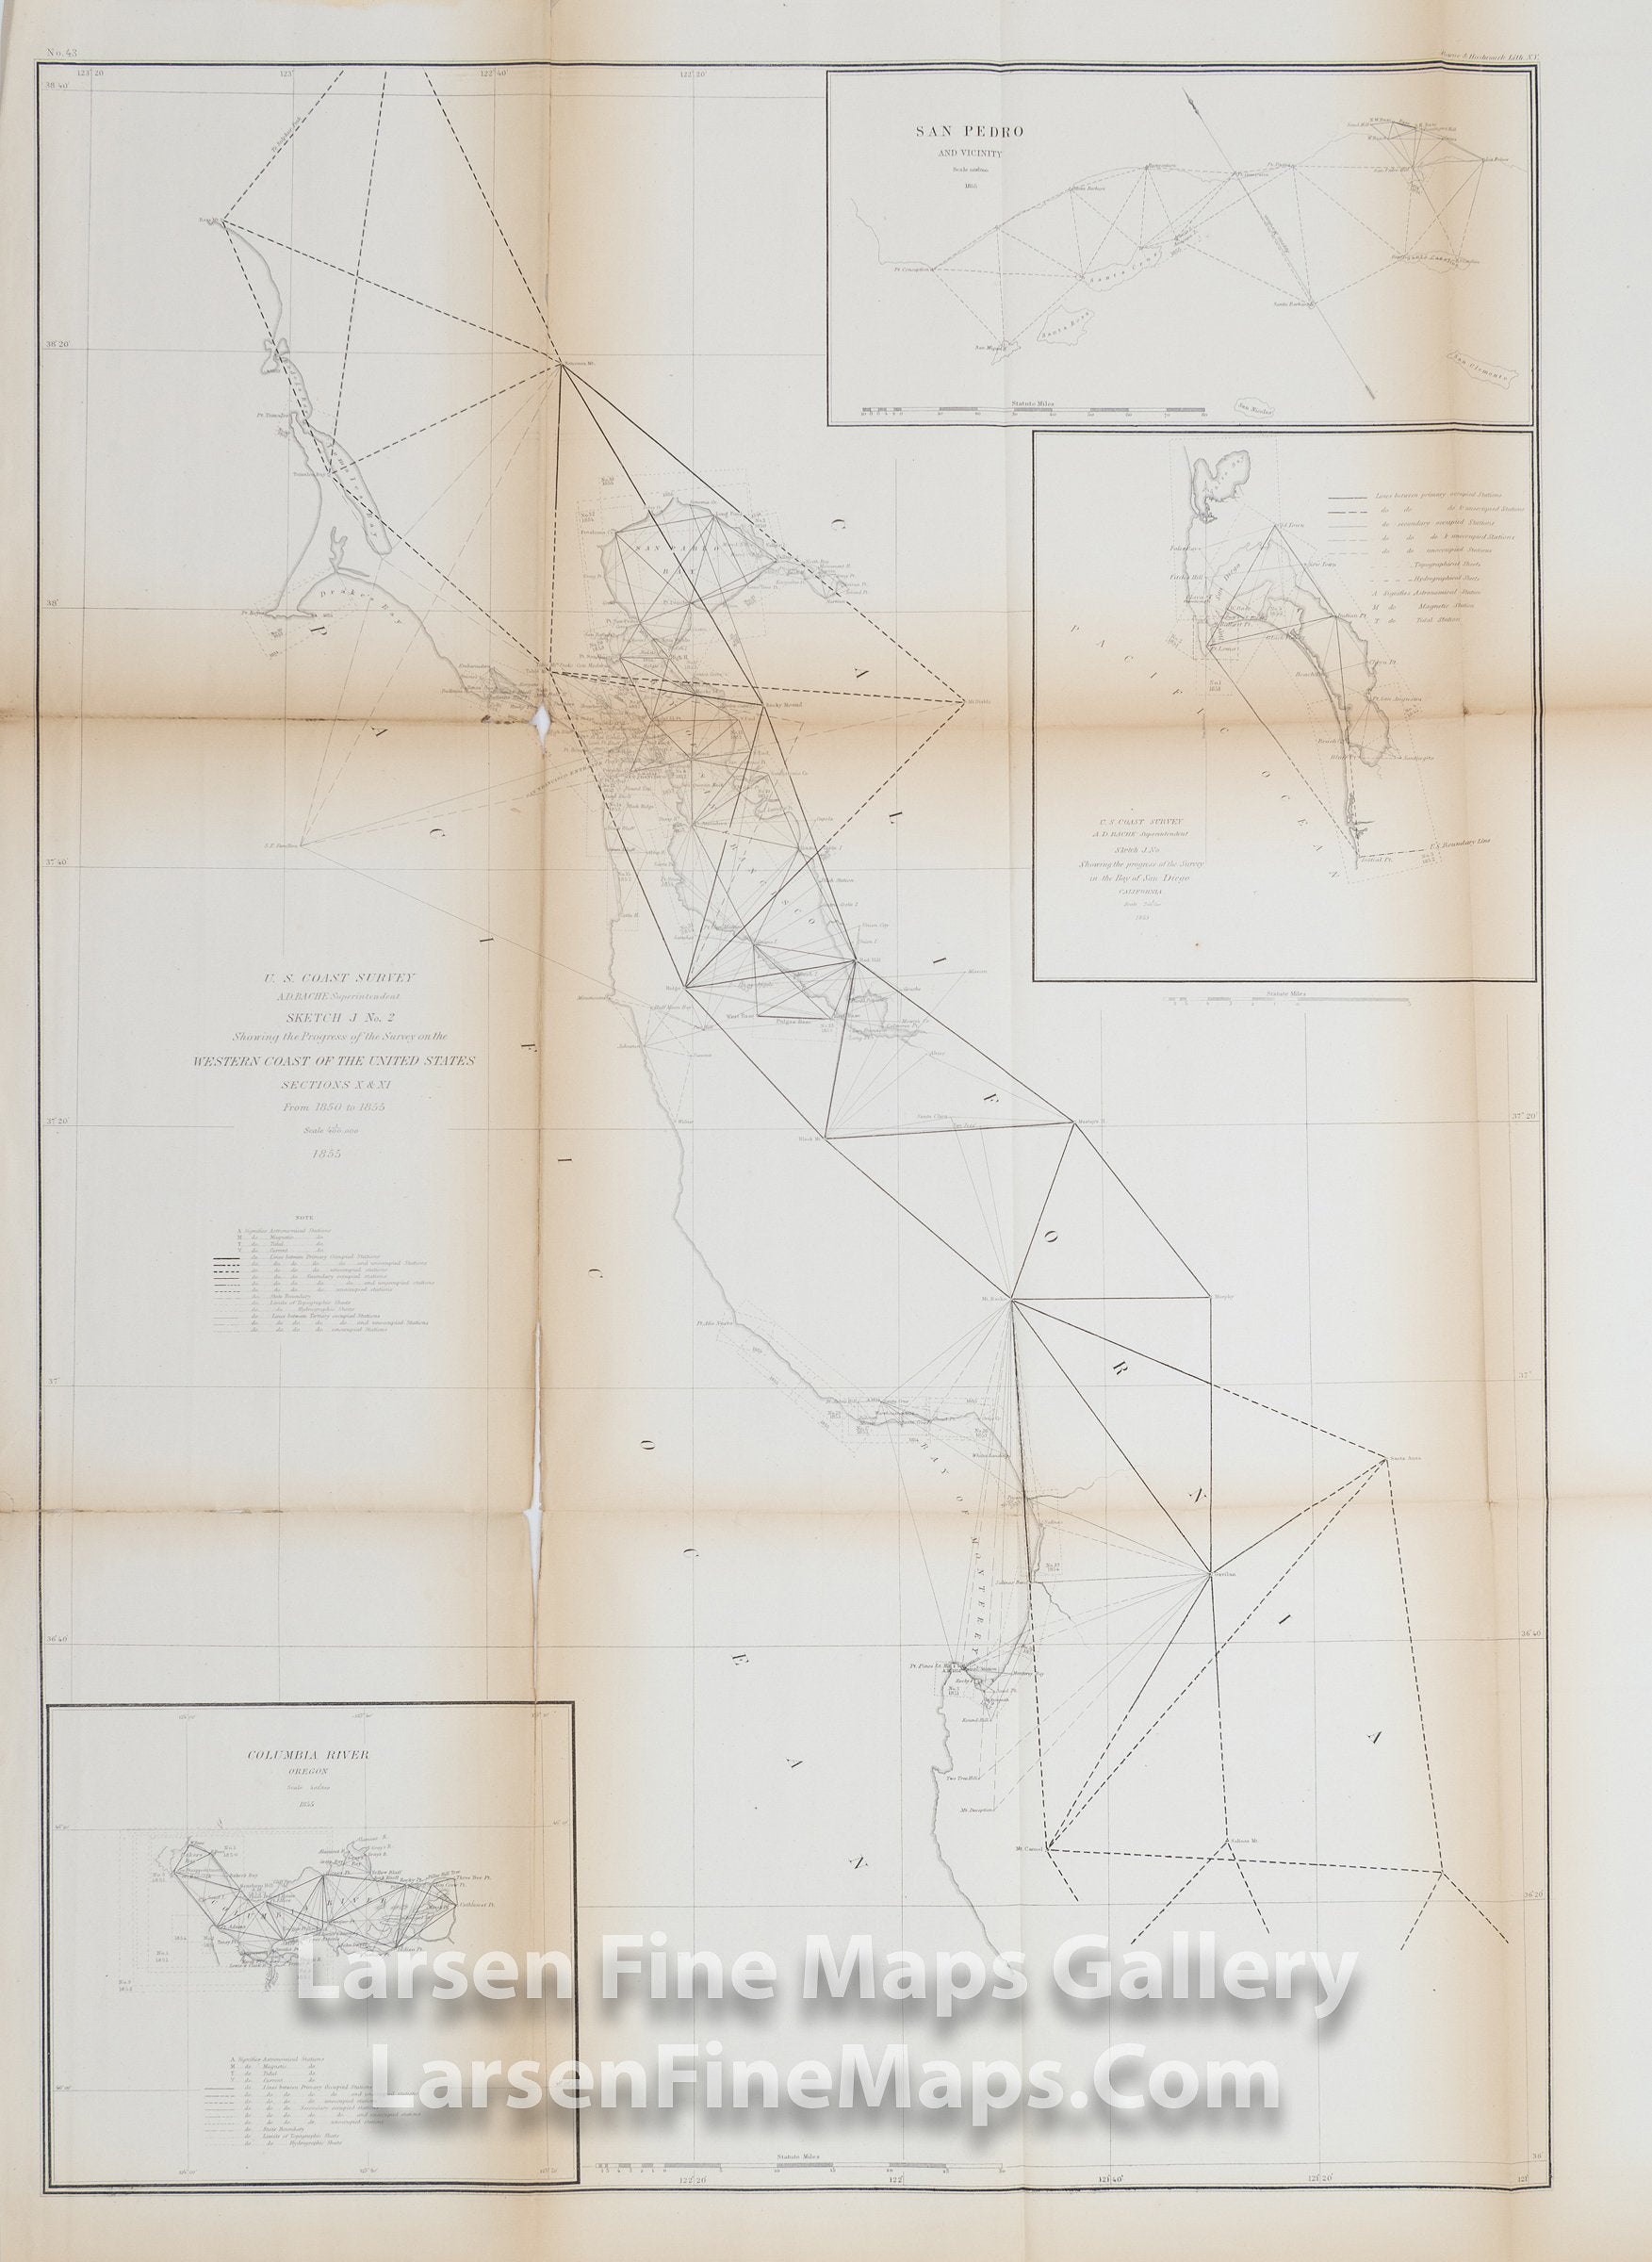 Sketch J No. 2 Showing the Progress of the Survey on the Western Coast of The United States Sections X & XI From 1850 to 1855